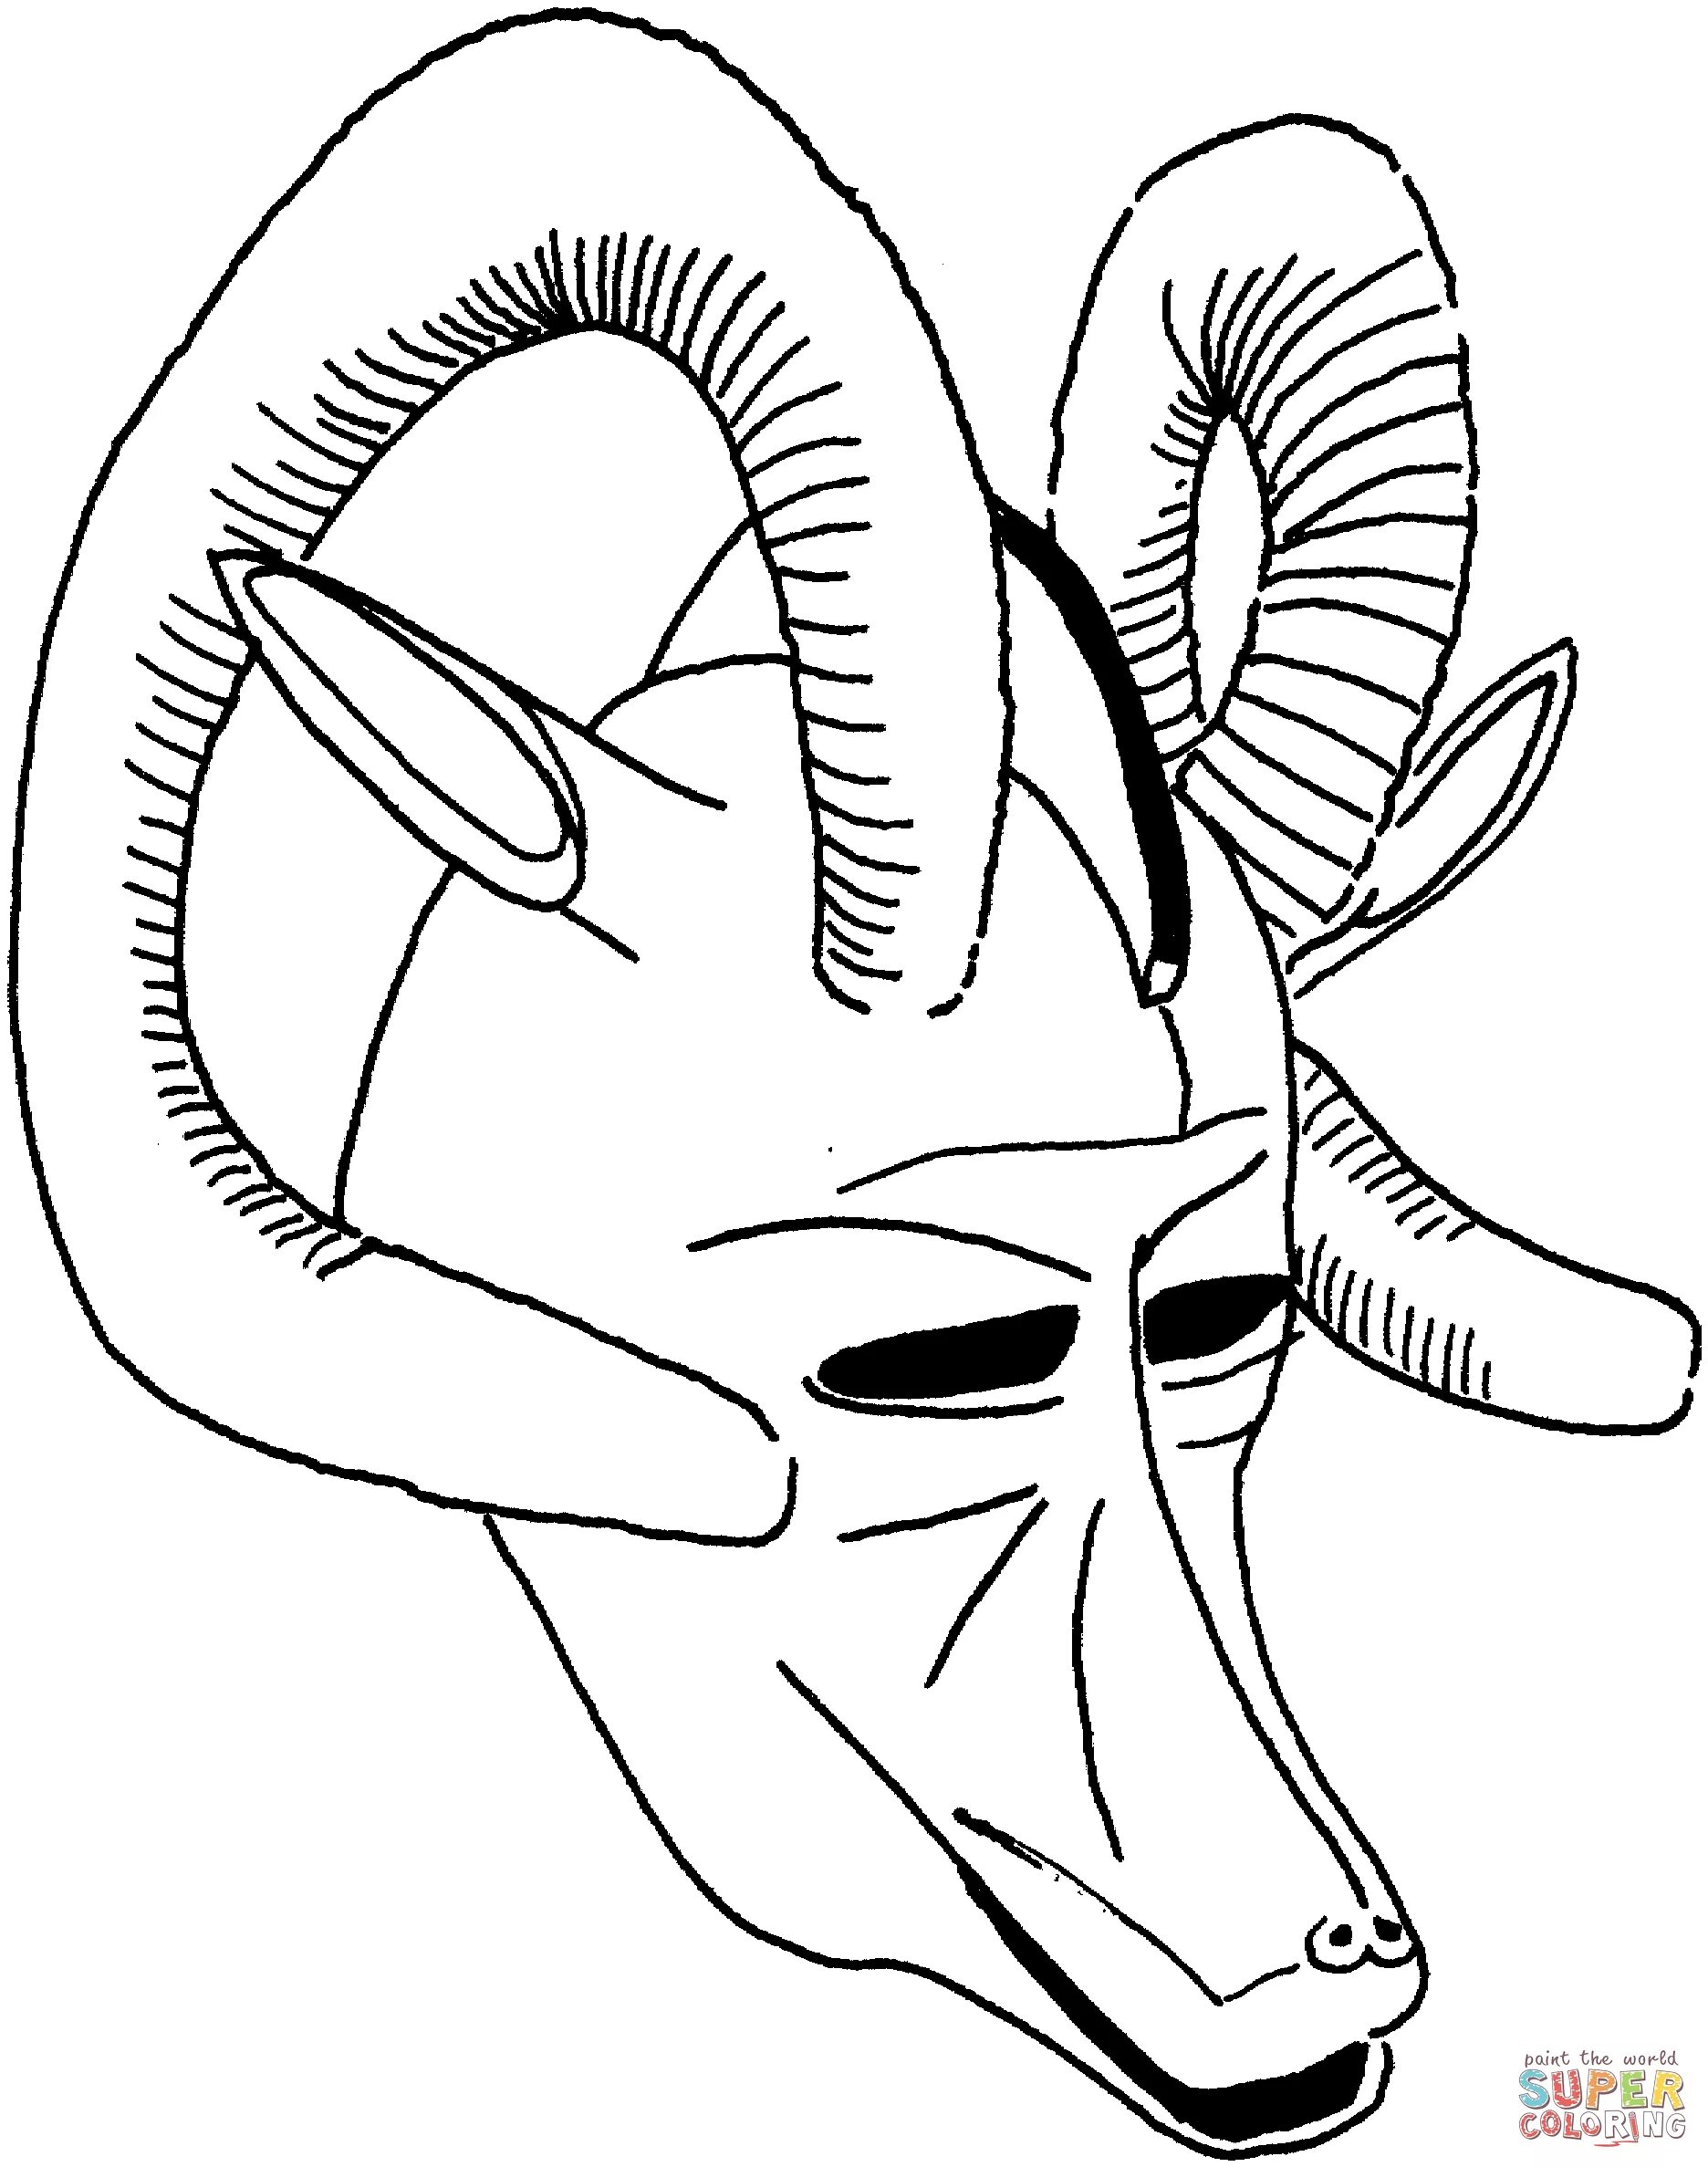 Goat mask color-explosion coloring page